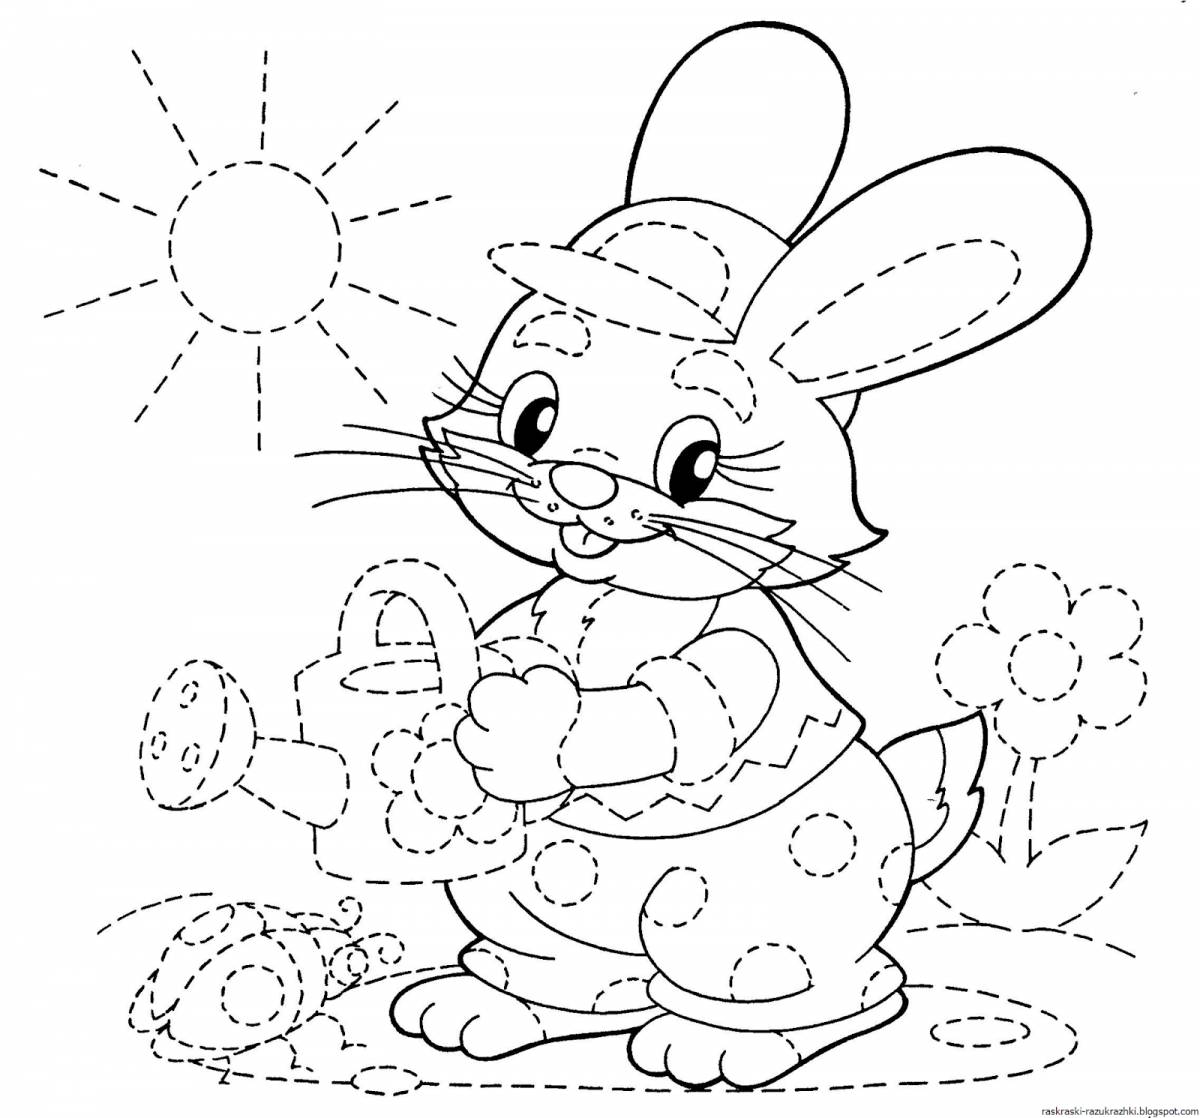 Crazy coloring pages for kids